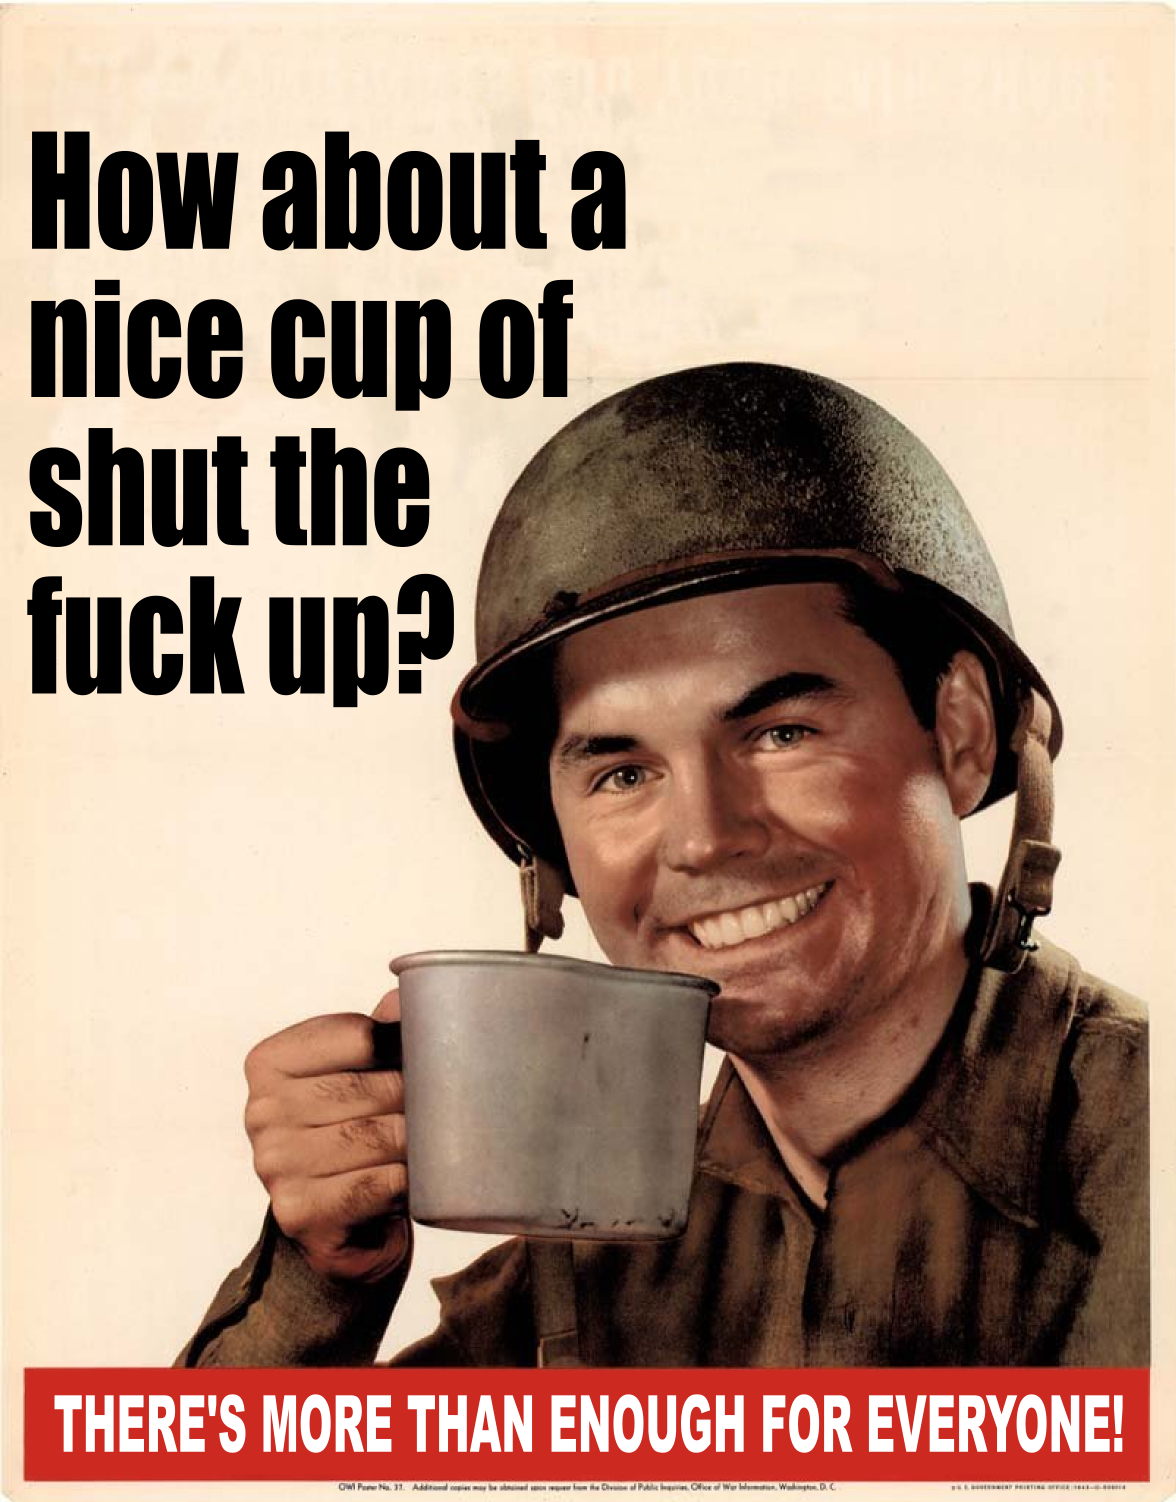 How about a nice cup of shut the fuck up